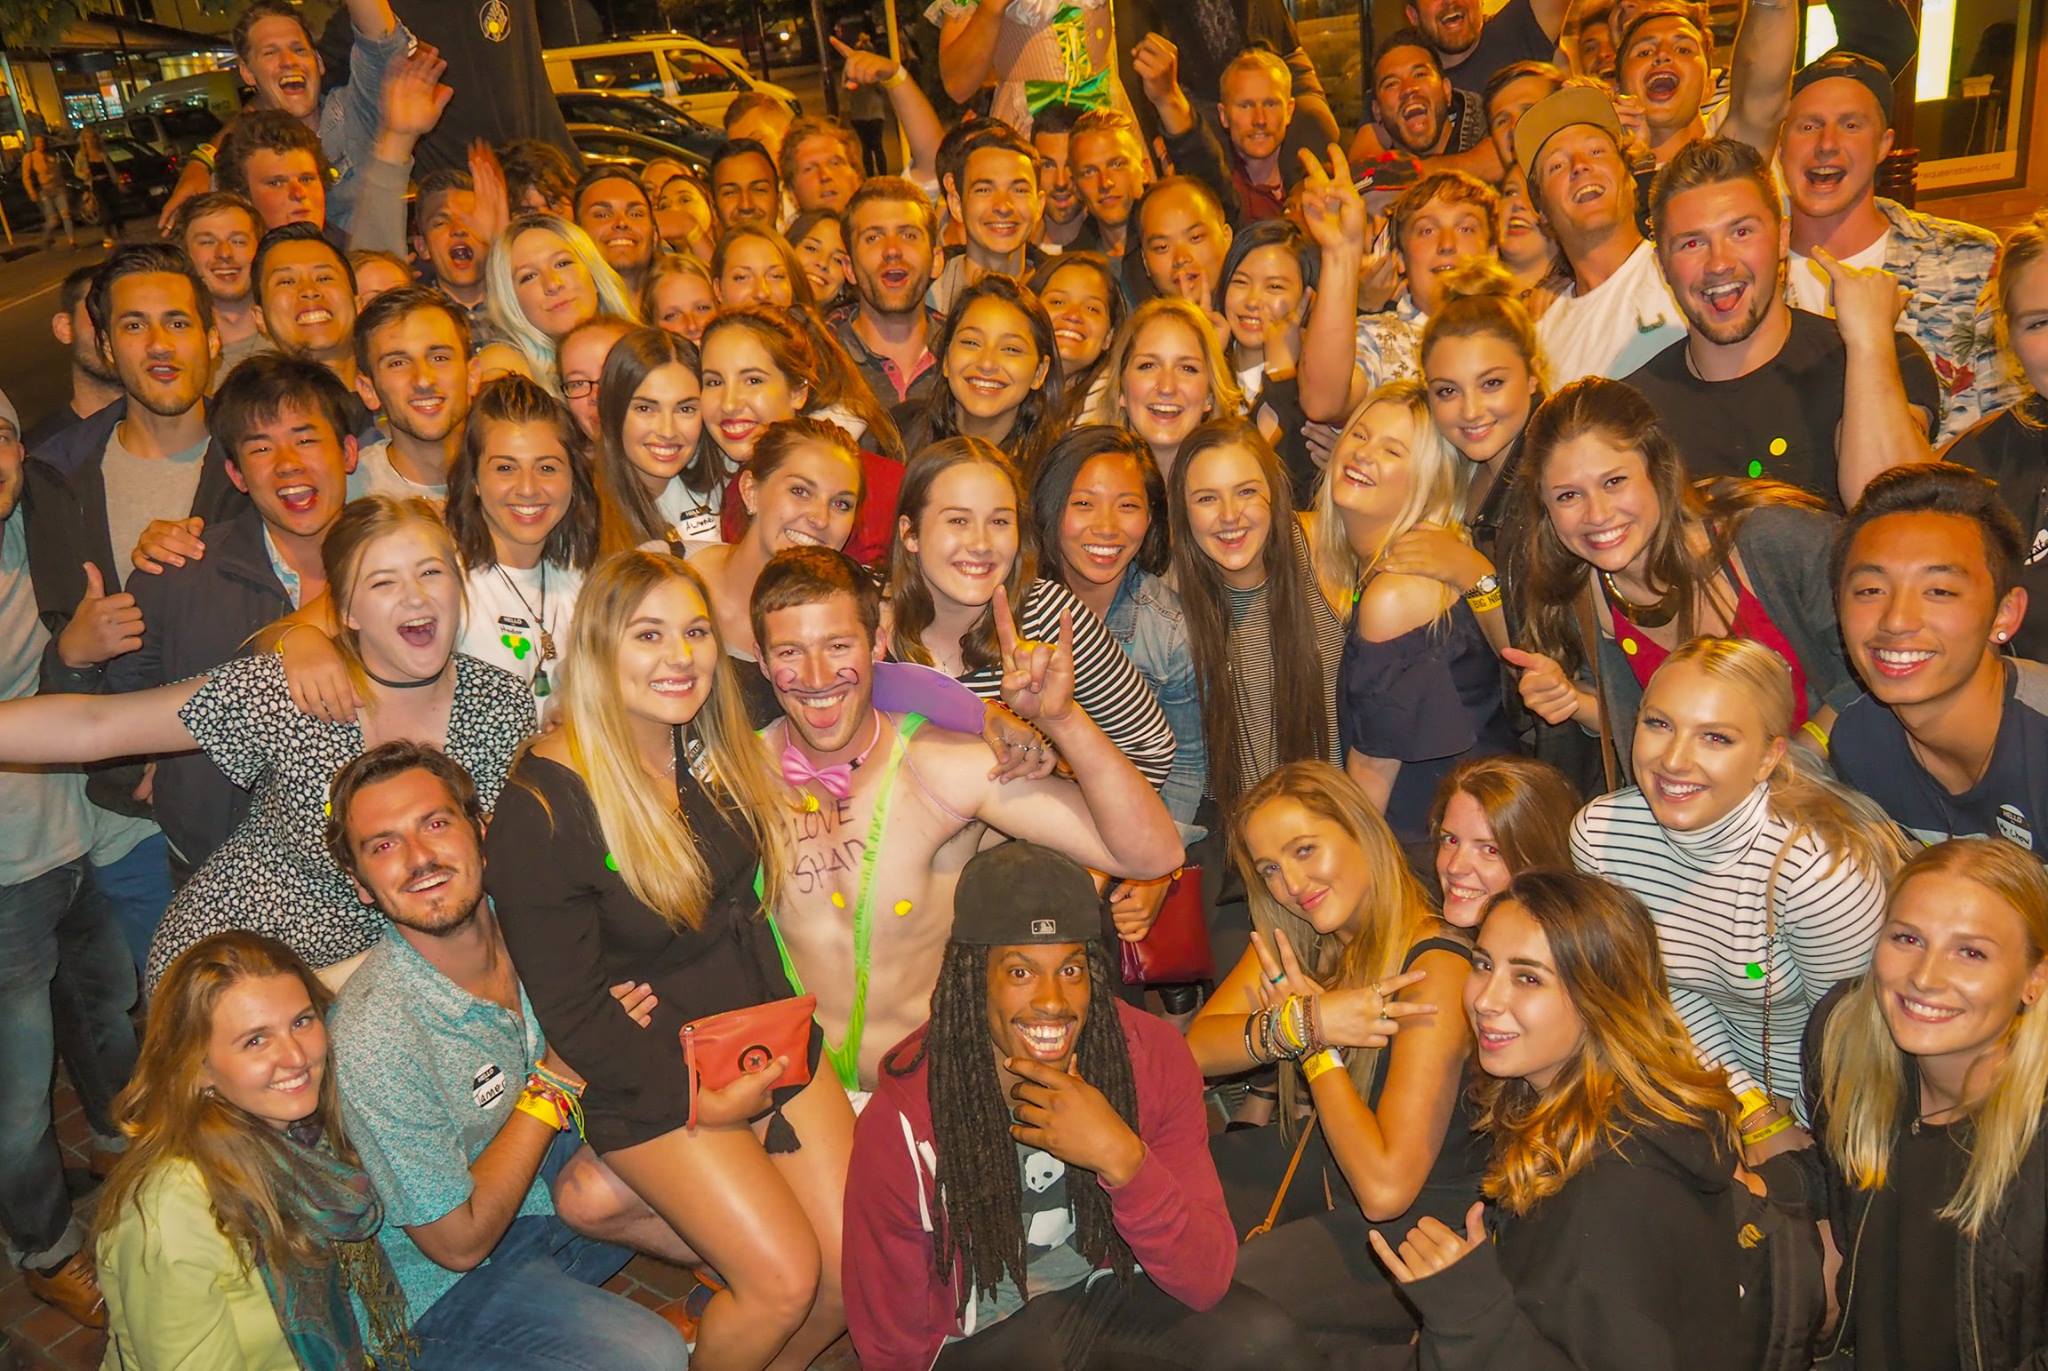 huge group on the big night out pub crawl in Queenstown on Saturday nights having fun bar hopping from club to pub